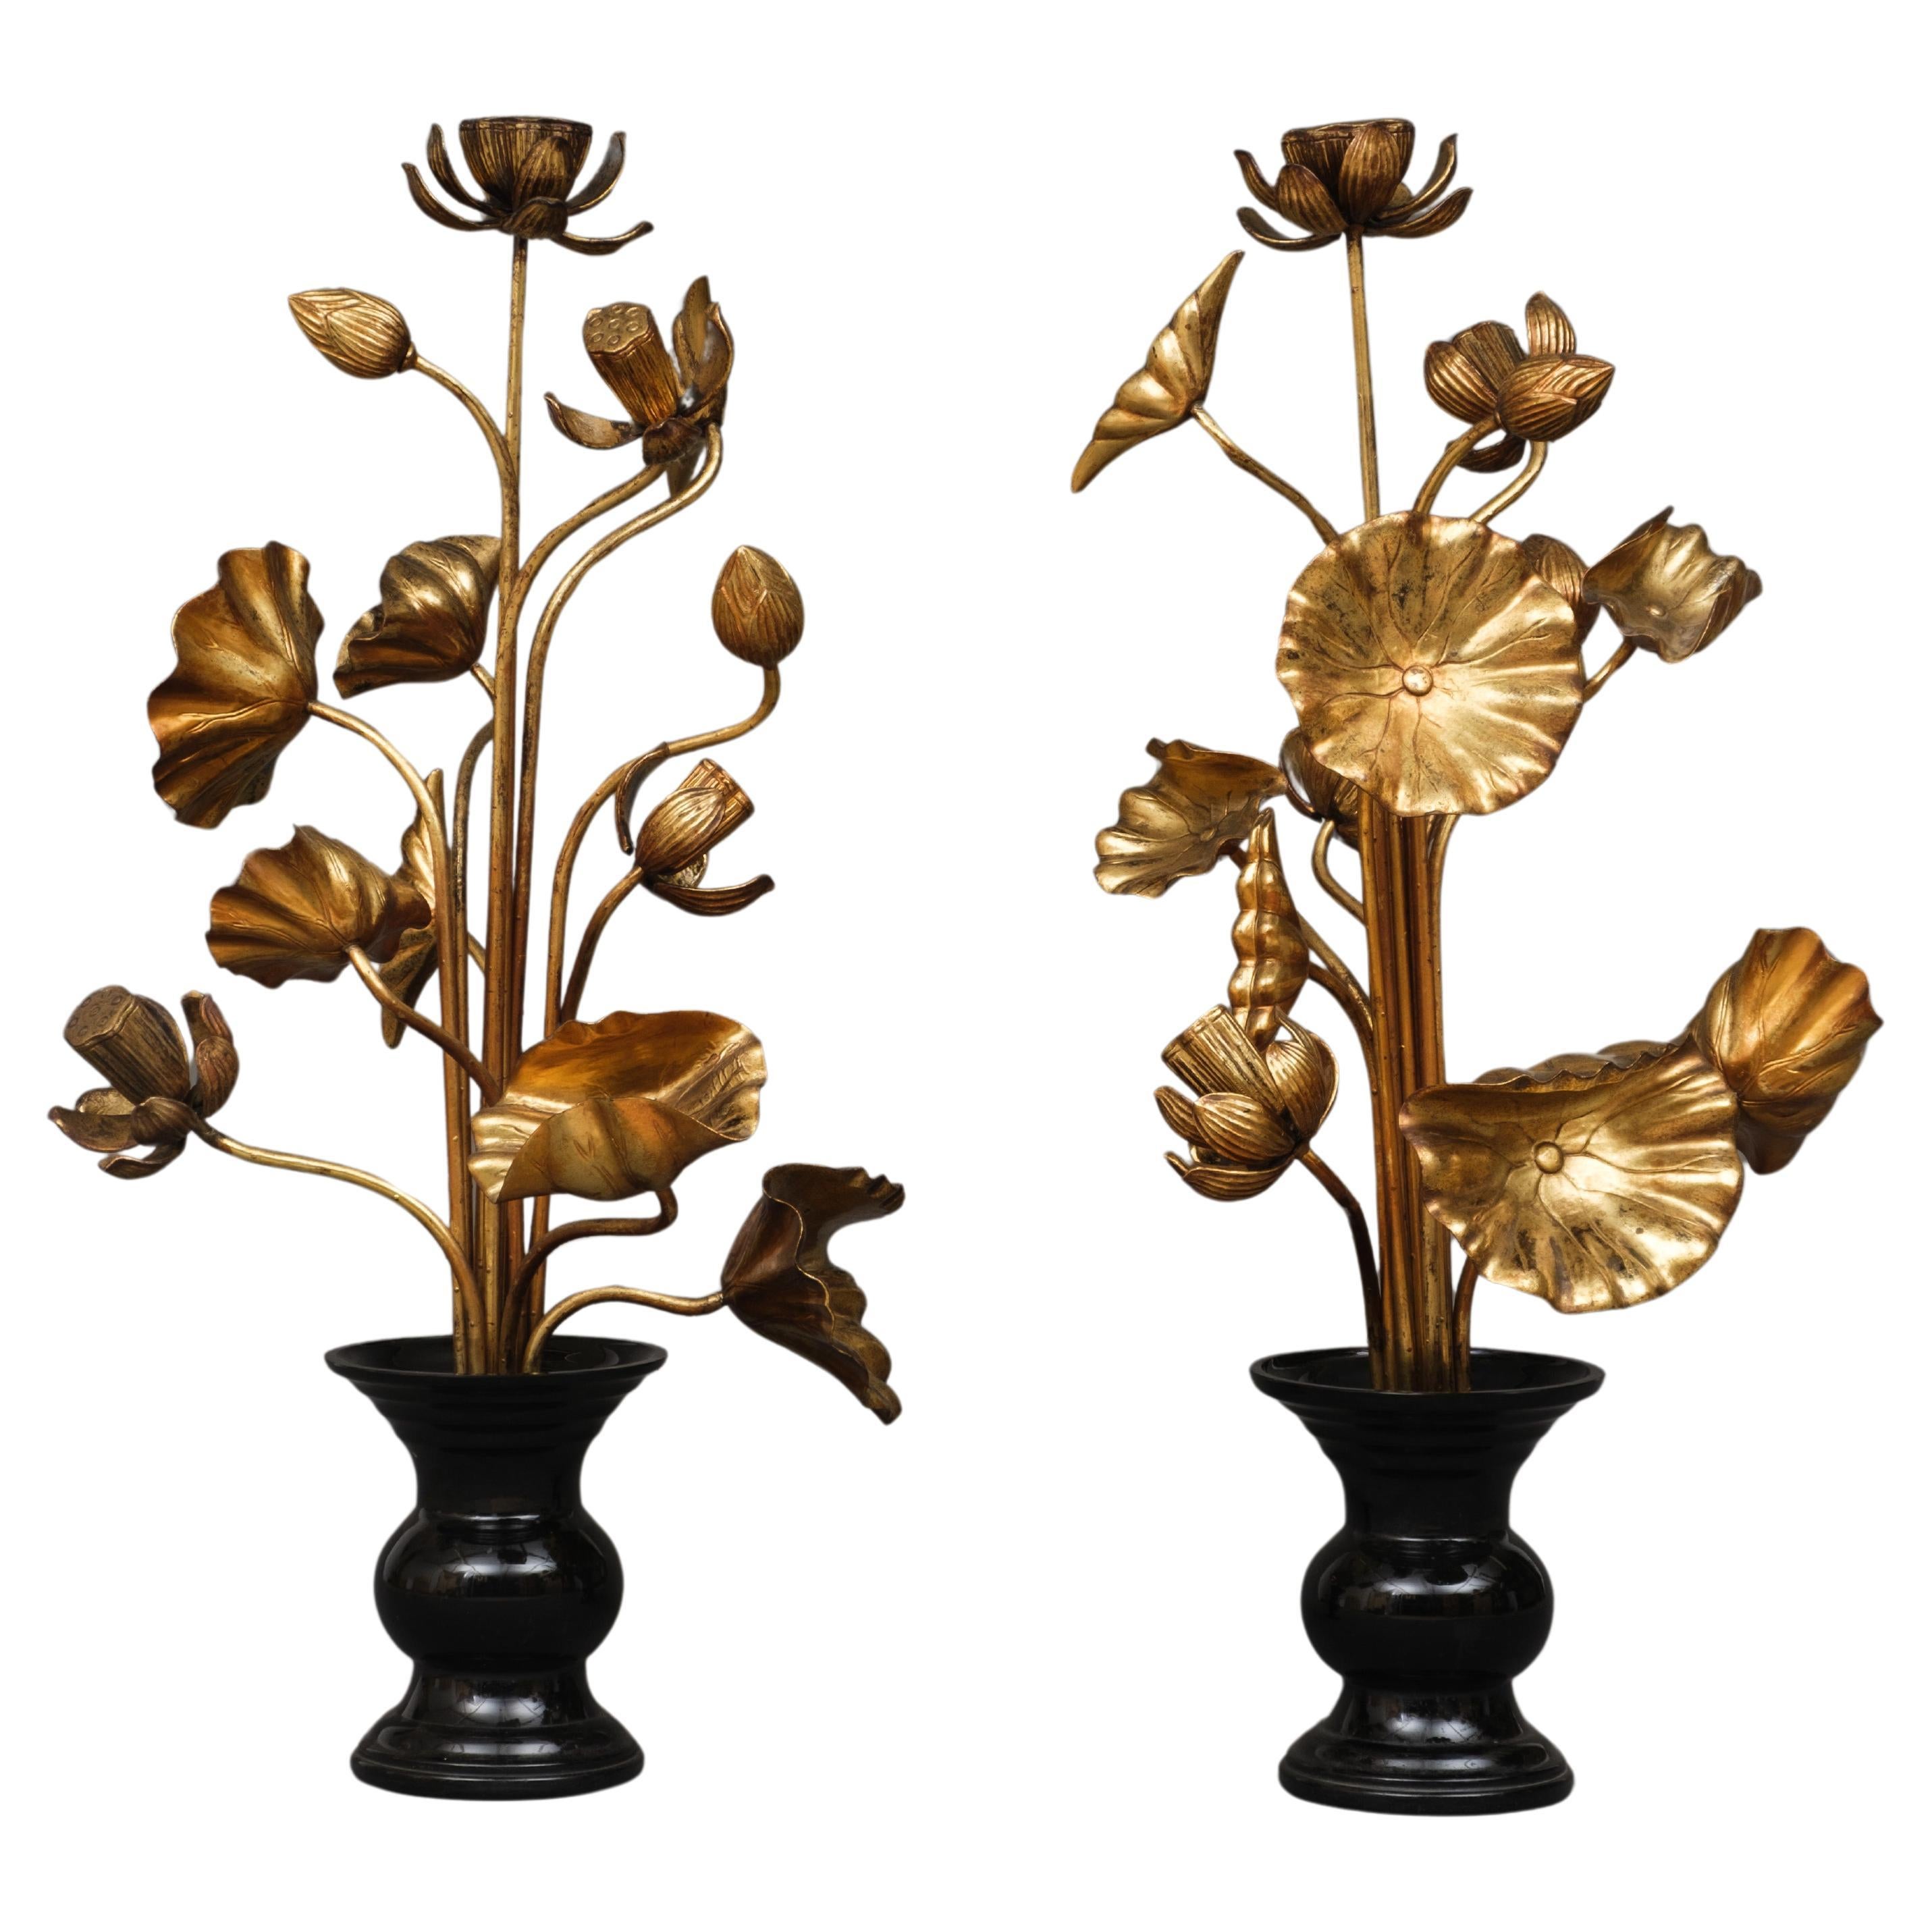 Large pair of Japanese ‘Jyôka’ 常花, sets of gilded lotus flowers and -leaves. For Sale